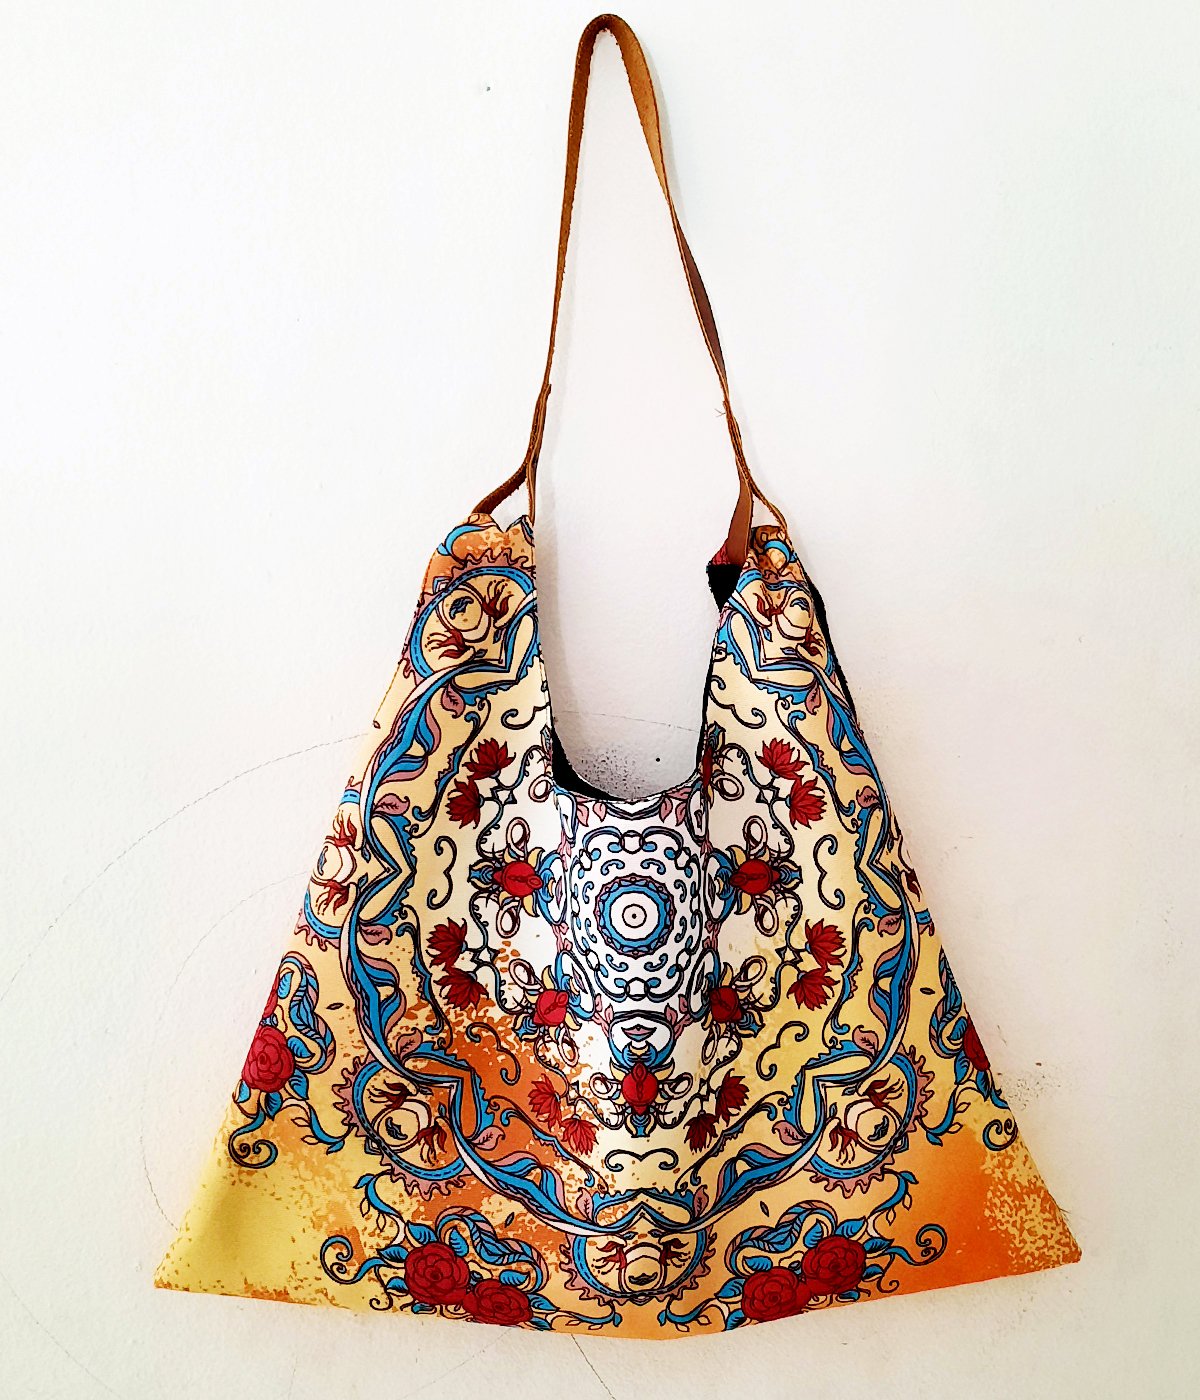 Triangle Bag / Tote Bag / Canvas Bags / Canvas Tote/ Free Shipping